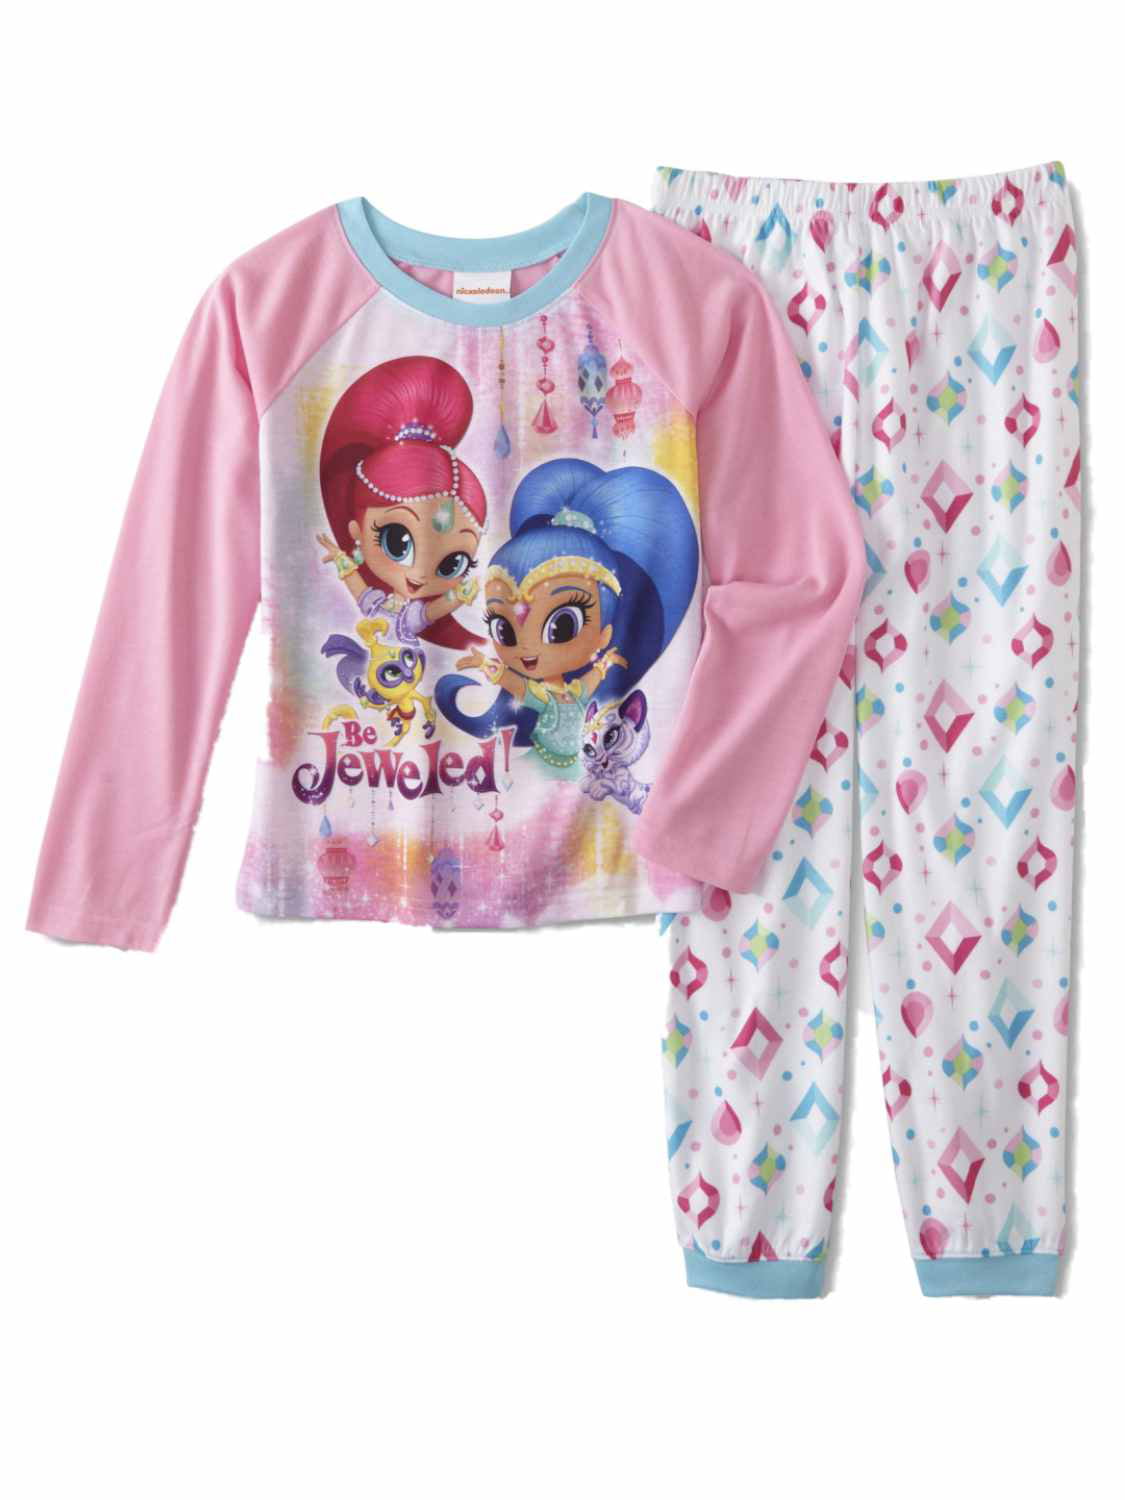 Official Shimmer And Shine Pink Blue Long Sleeve Pyjamas PJs 18m-5yr 